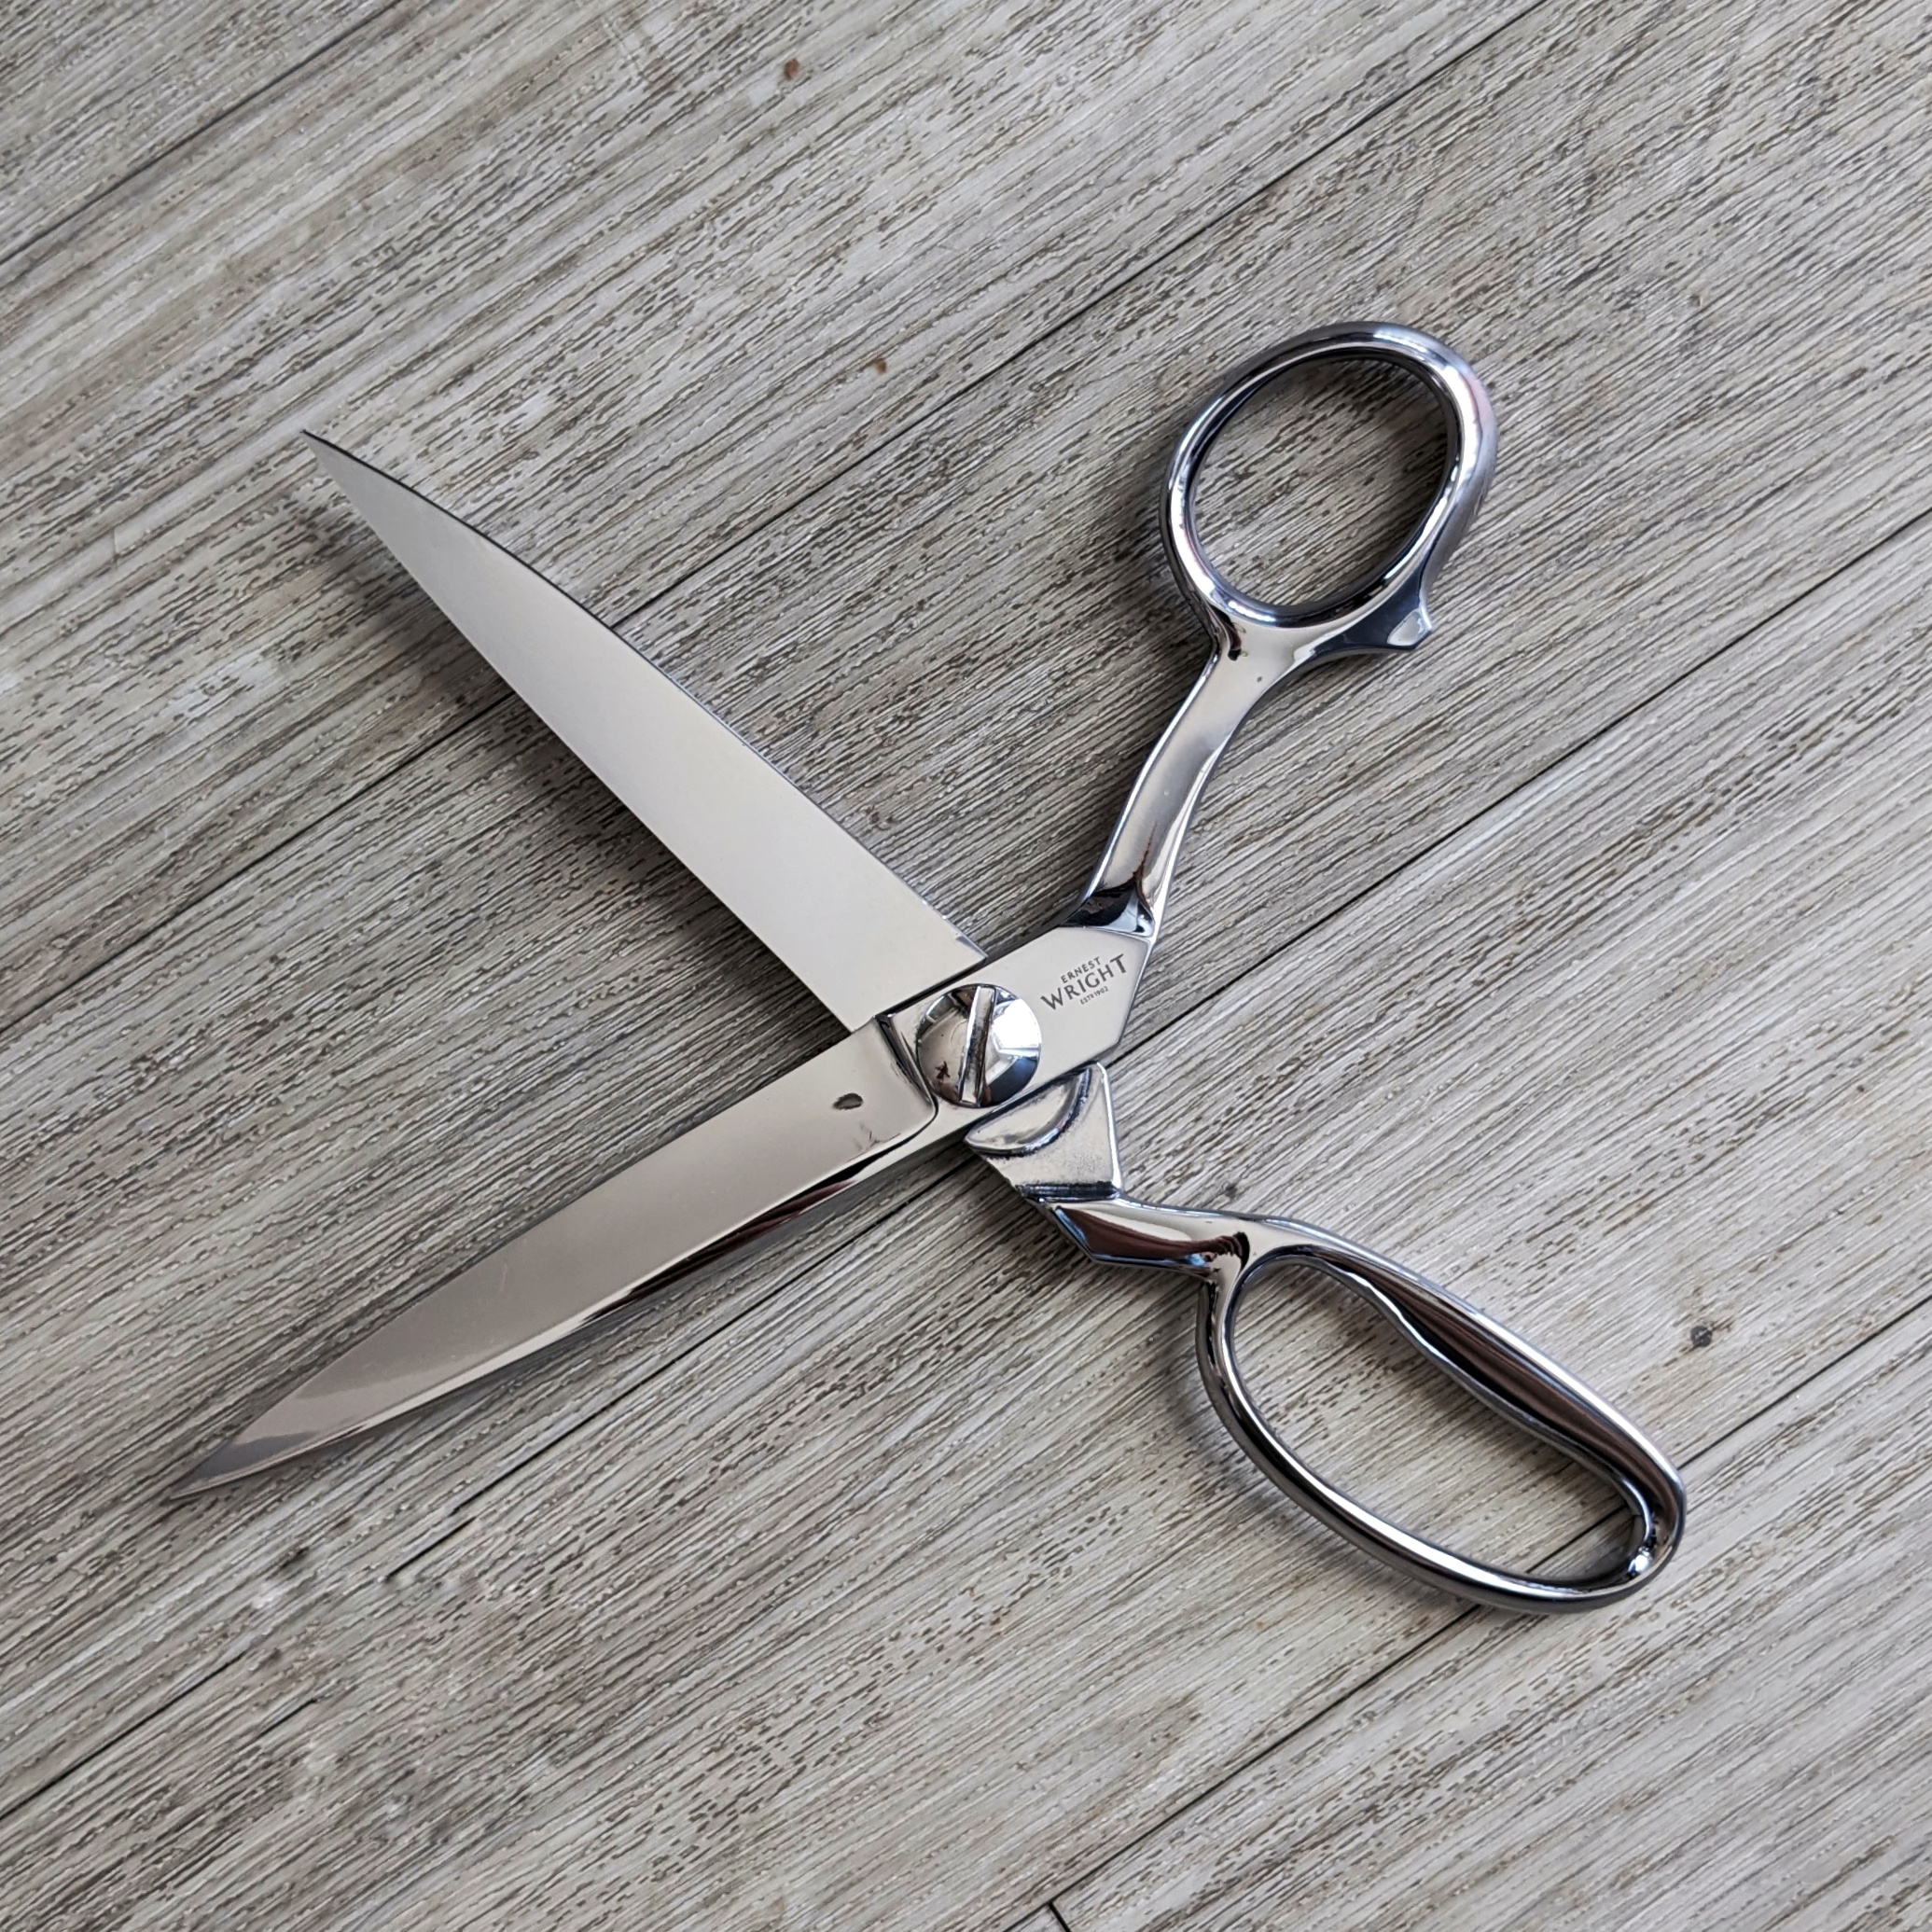 Leather Shears by Ernest Wright